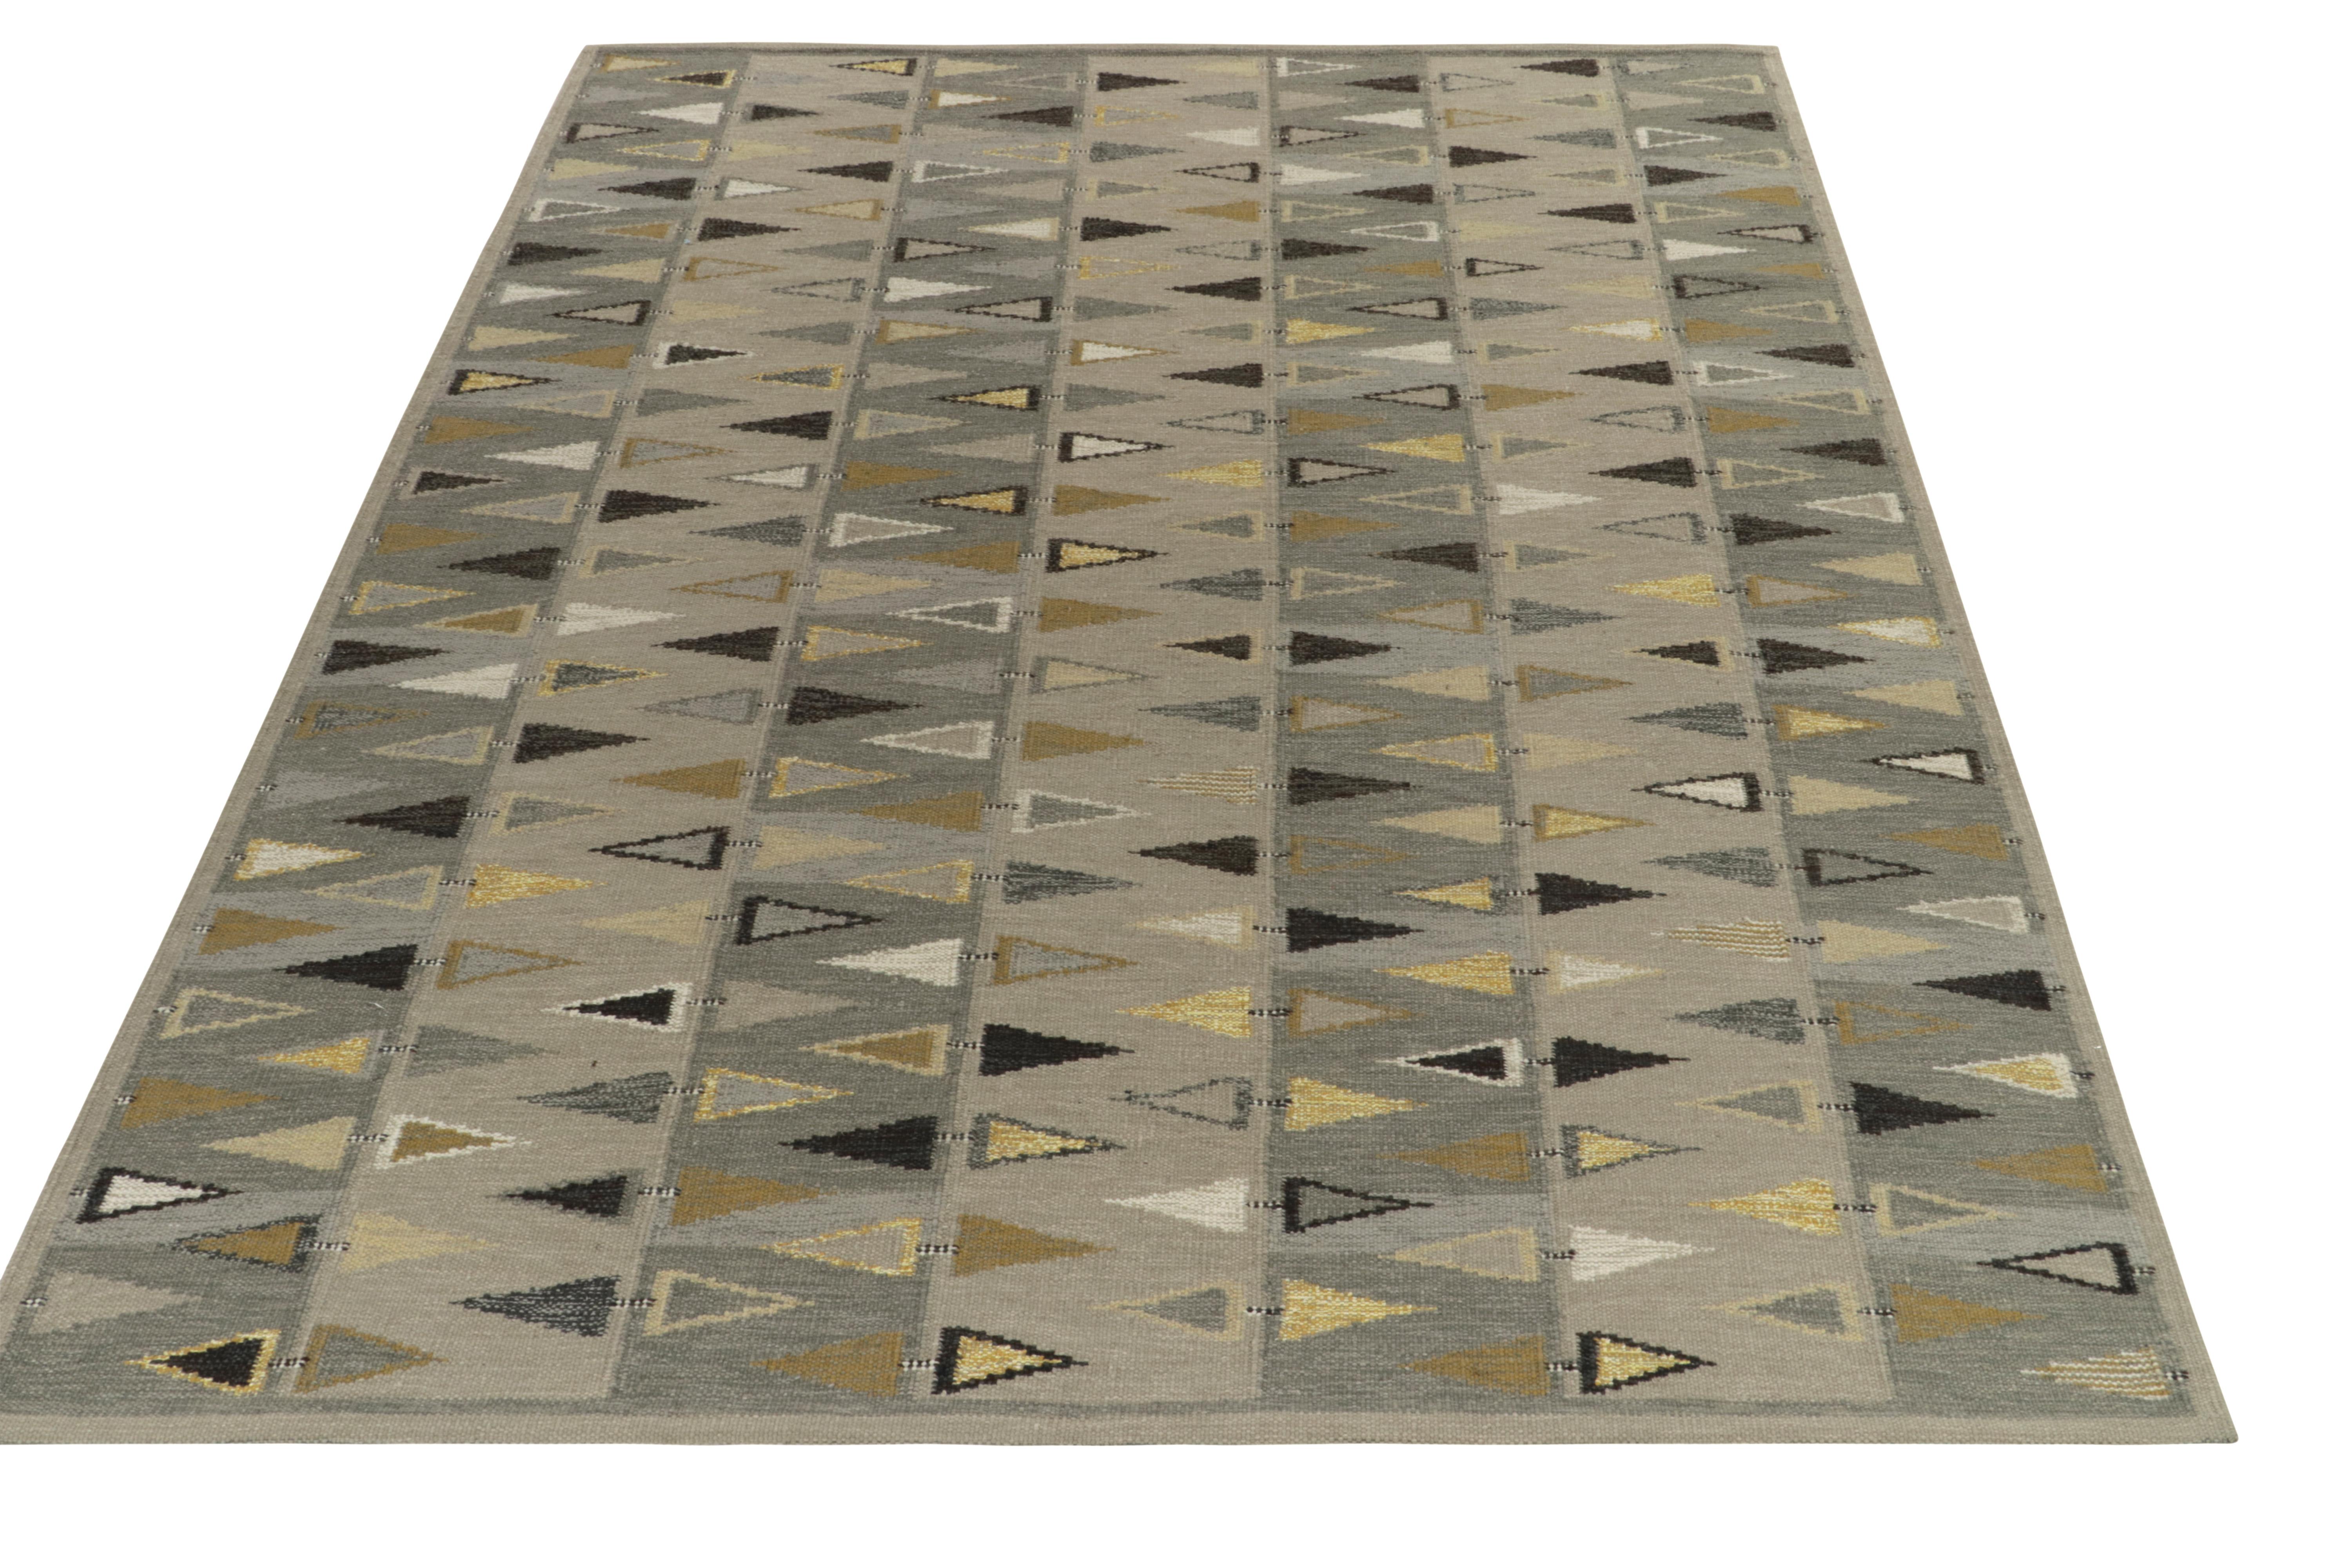 From our award-winning flatweave selections, a 9’7x12’2 Scandinavian style kilim rug showcasing unique movement & pleasing Mid-Century Modern symmetry. Handwoven in wool, the crisp geometry embodies the smartness lent by alternating tones of ochre,